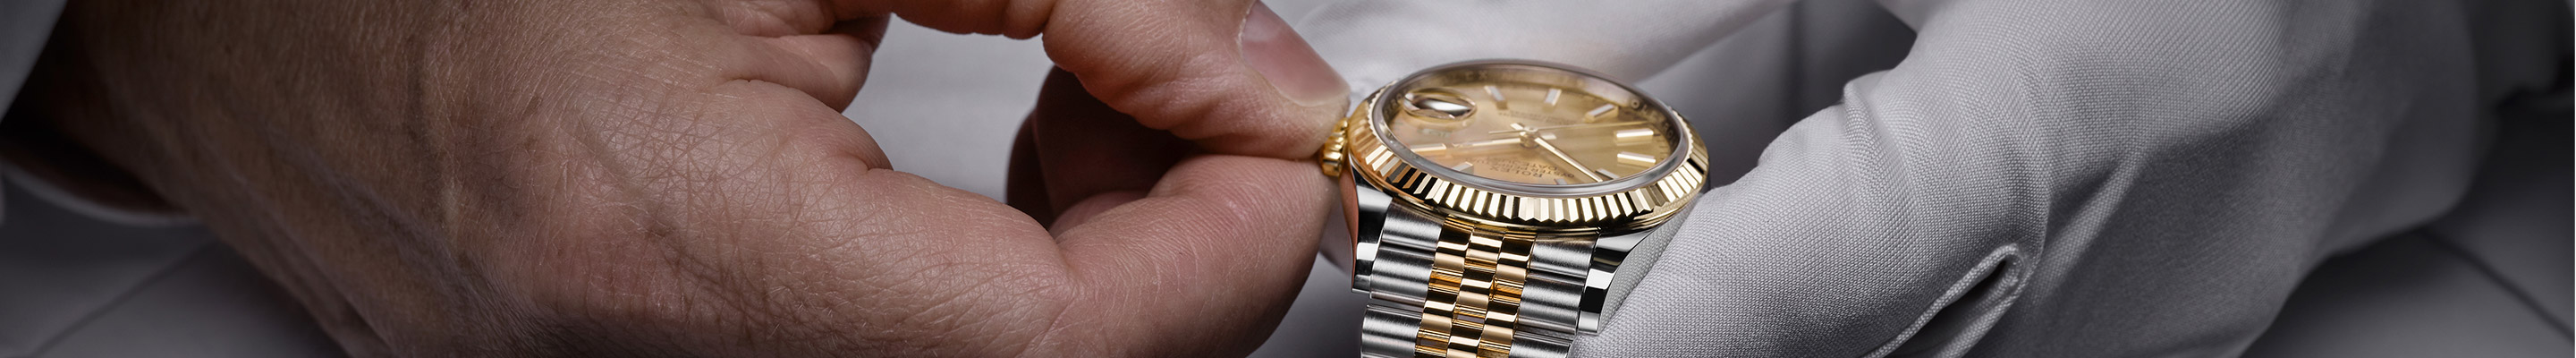 Rolex watch Servicing and Repair at Alter's Gem Jewelry